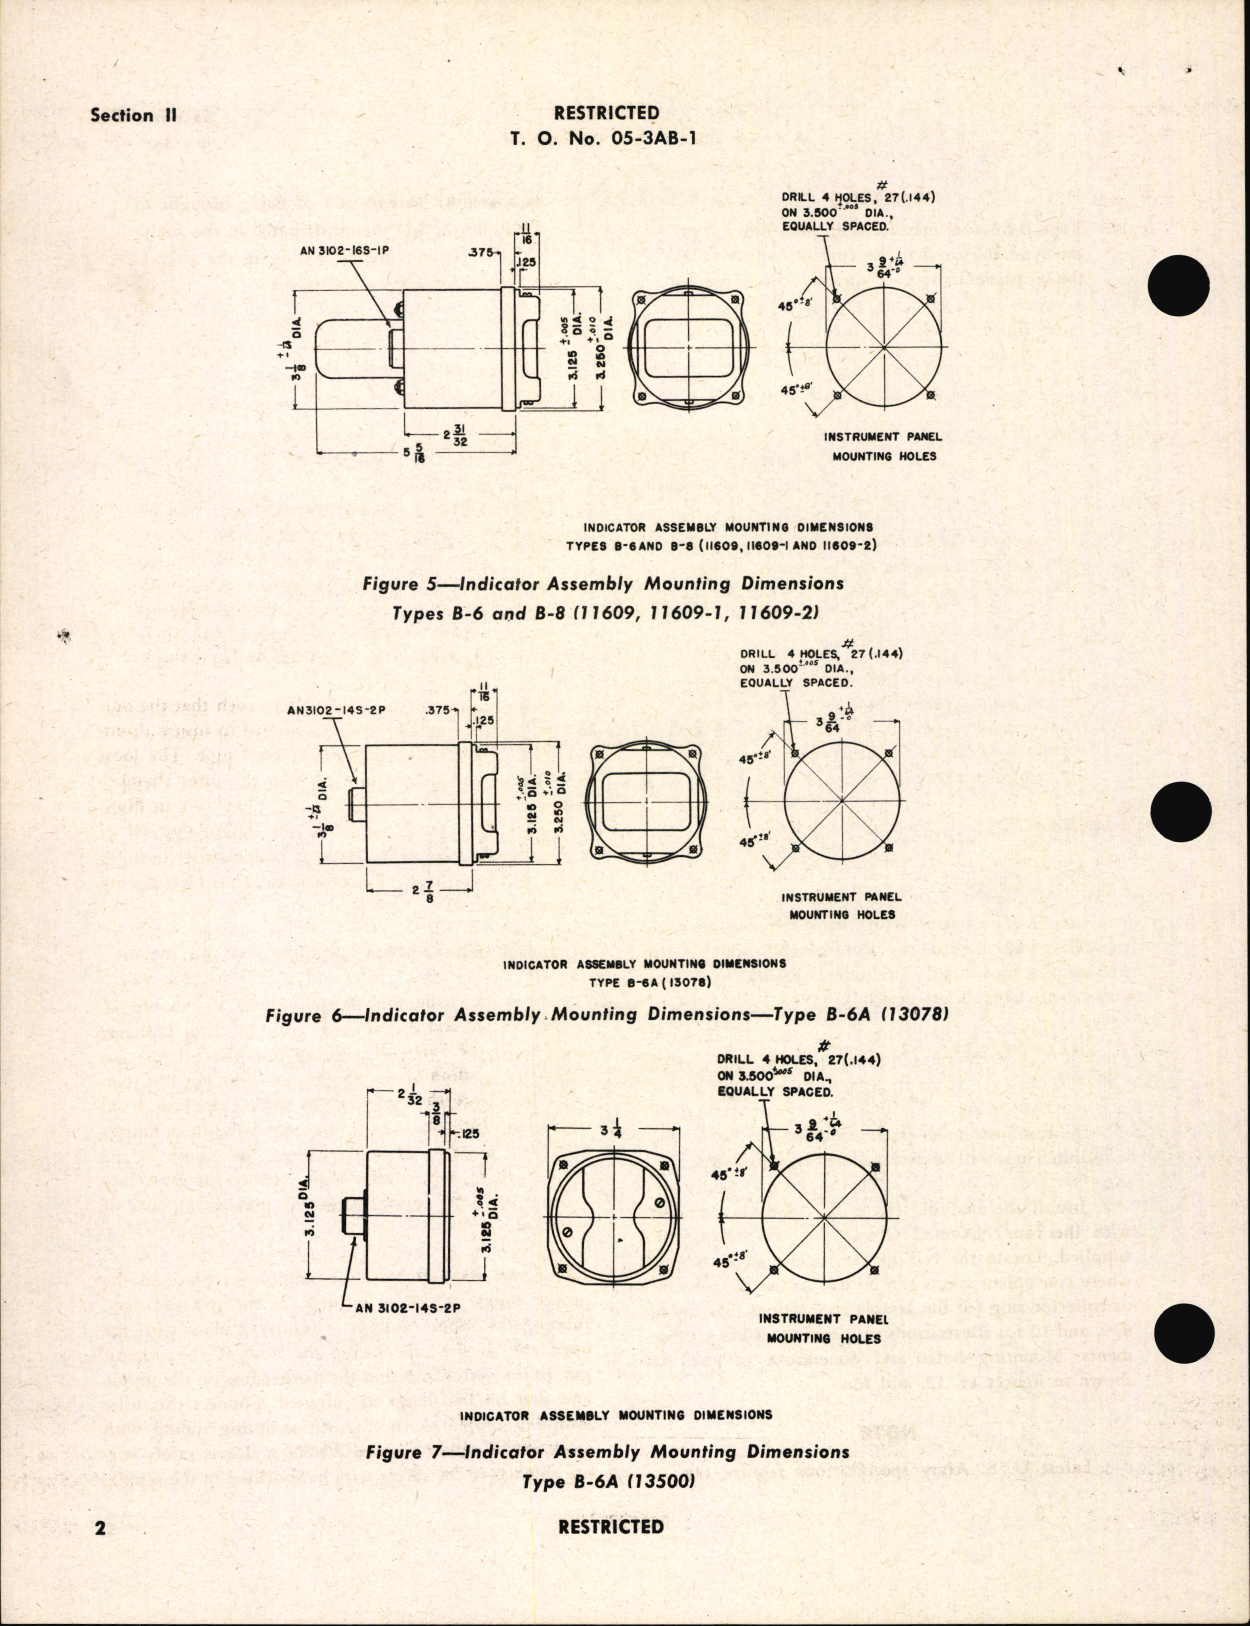 Sample page 8 from AirCorps Library document: Handbook of Instructions with Parts Catalog for Fuel Mixture Indicators